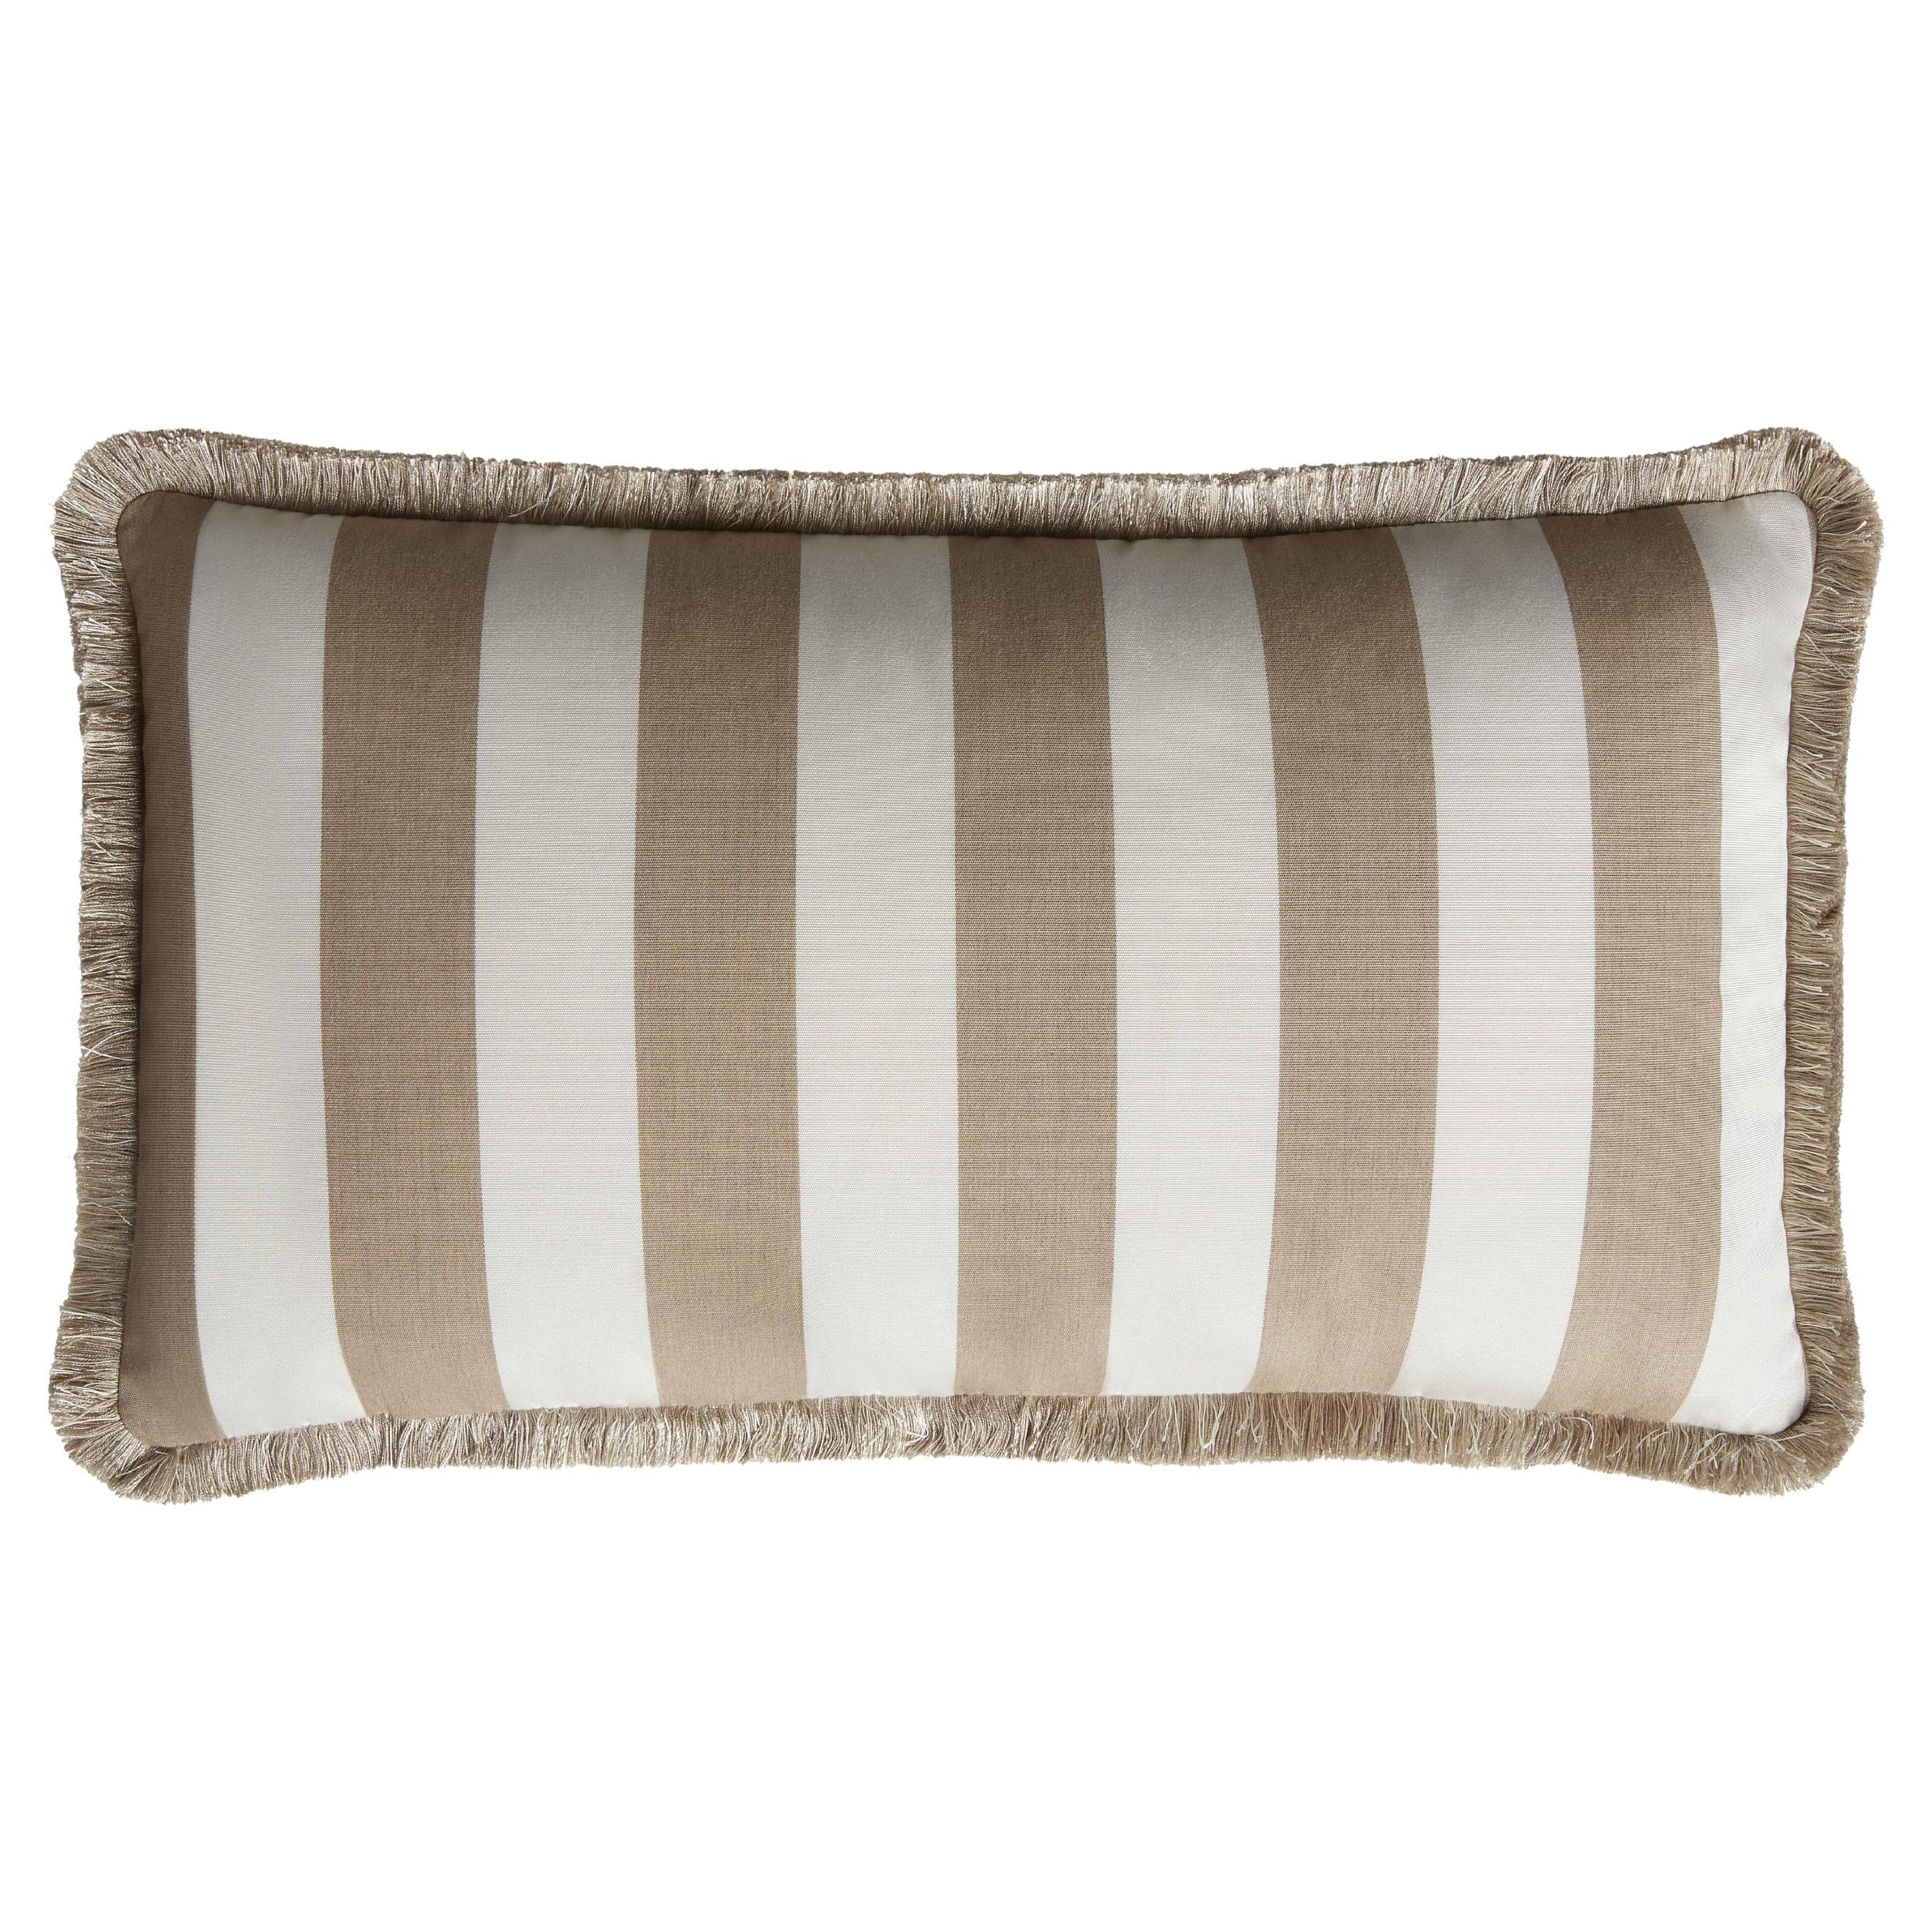 Striped Happy Pillow Outdoor with Fringes Beige and White  For Sale